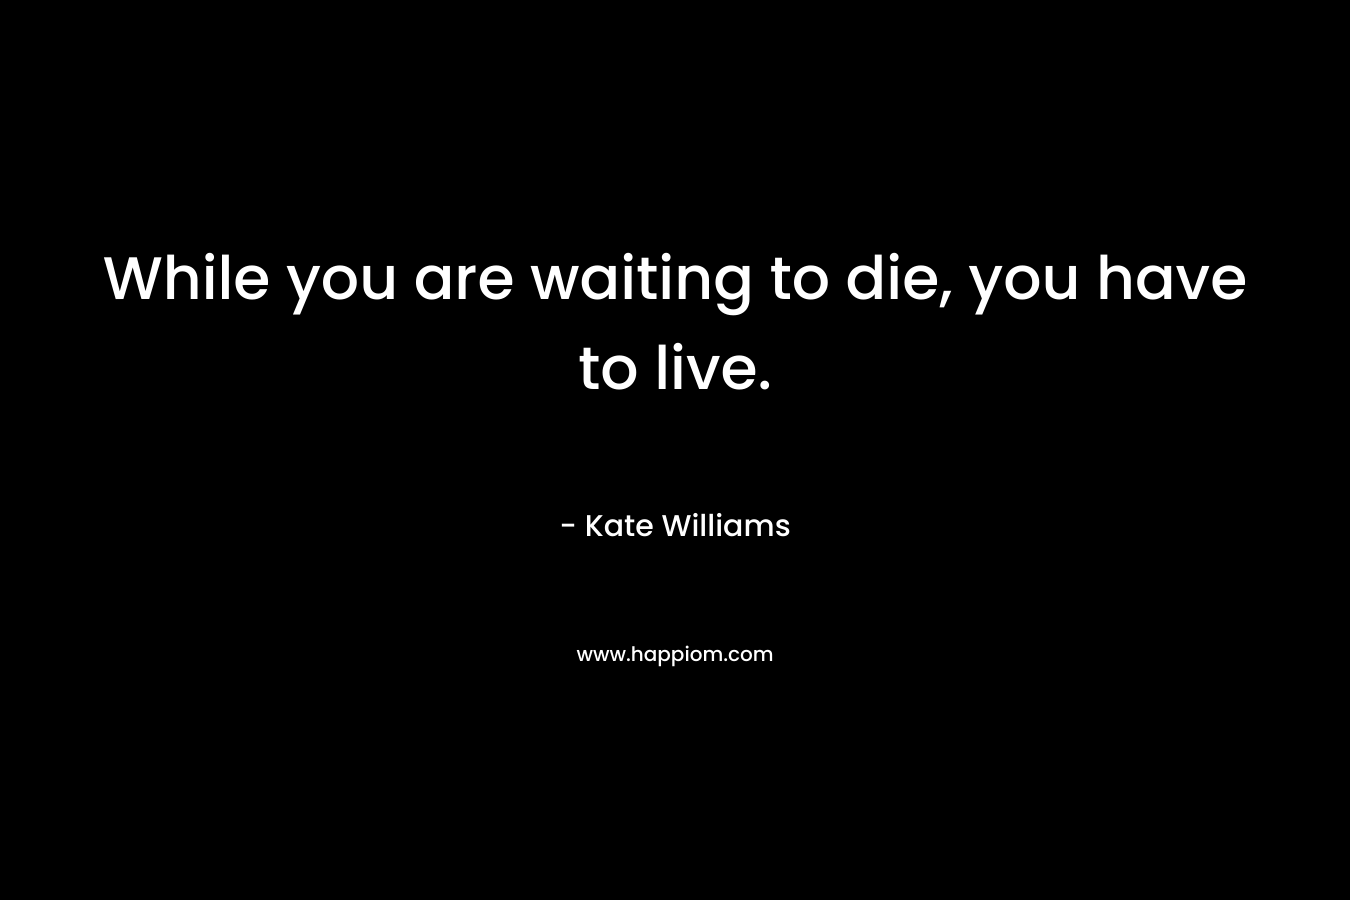 While you are waiting to die, you have to live. – Kate Williams